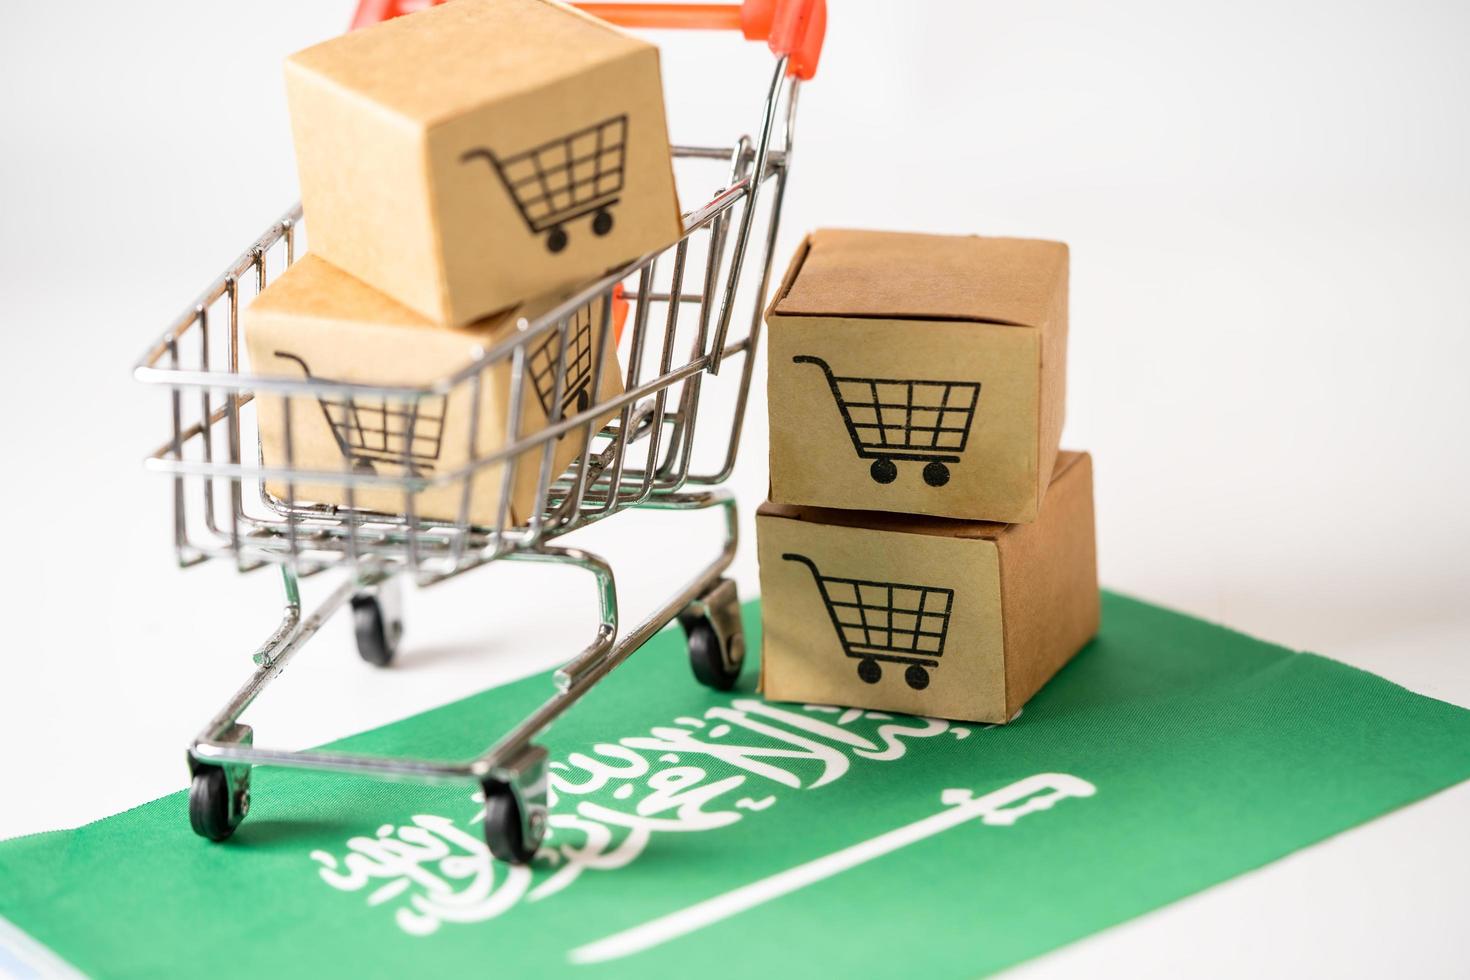 Box with shopping cart logo and Saudi Arabia flag, Import Export Shopping online or eCommerce finance delivery service store product shipping, trade, supplier concept. photo